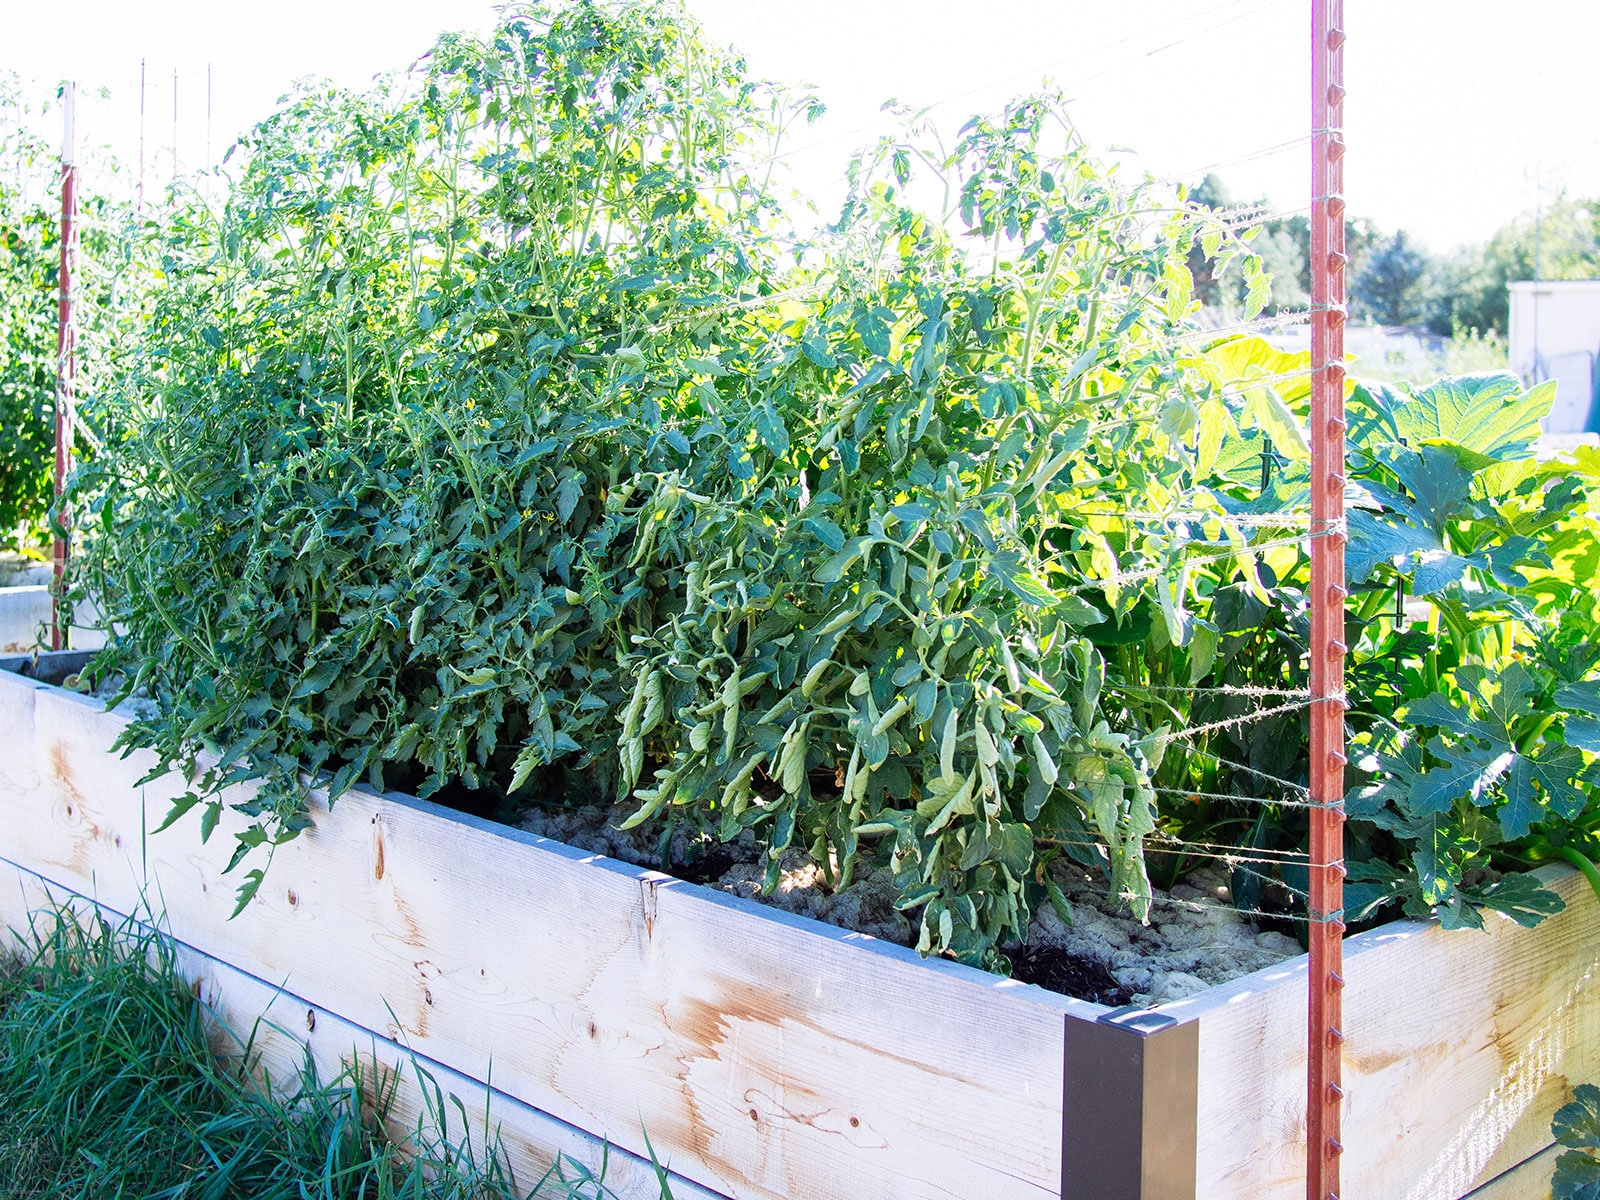 A row of tomato plants in a raised bed supported by a Florida weave trellis